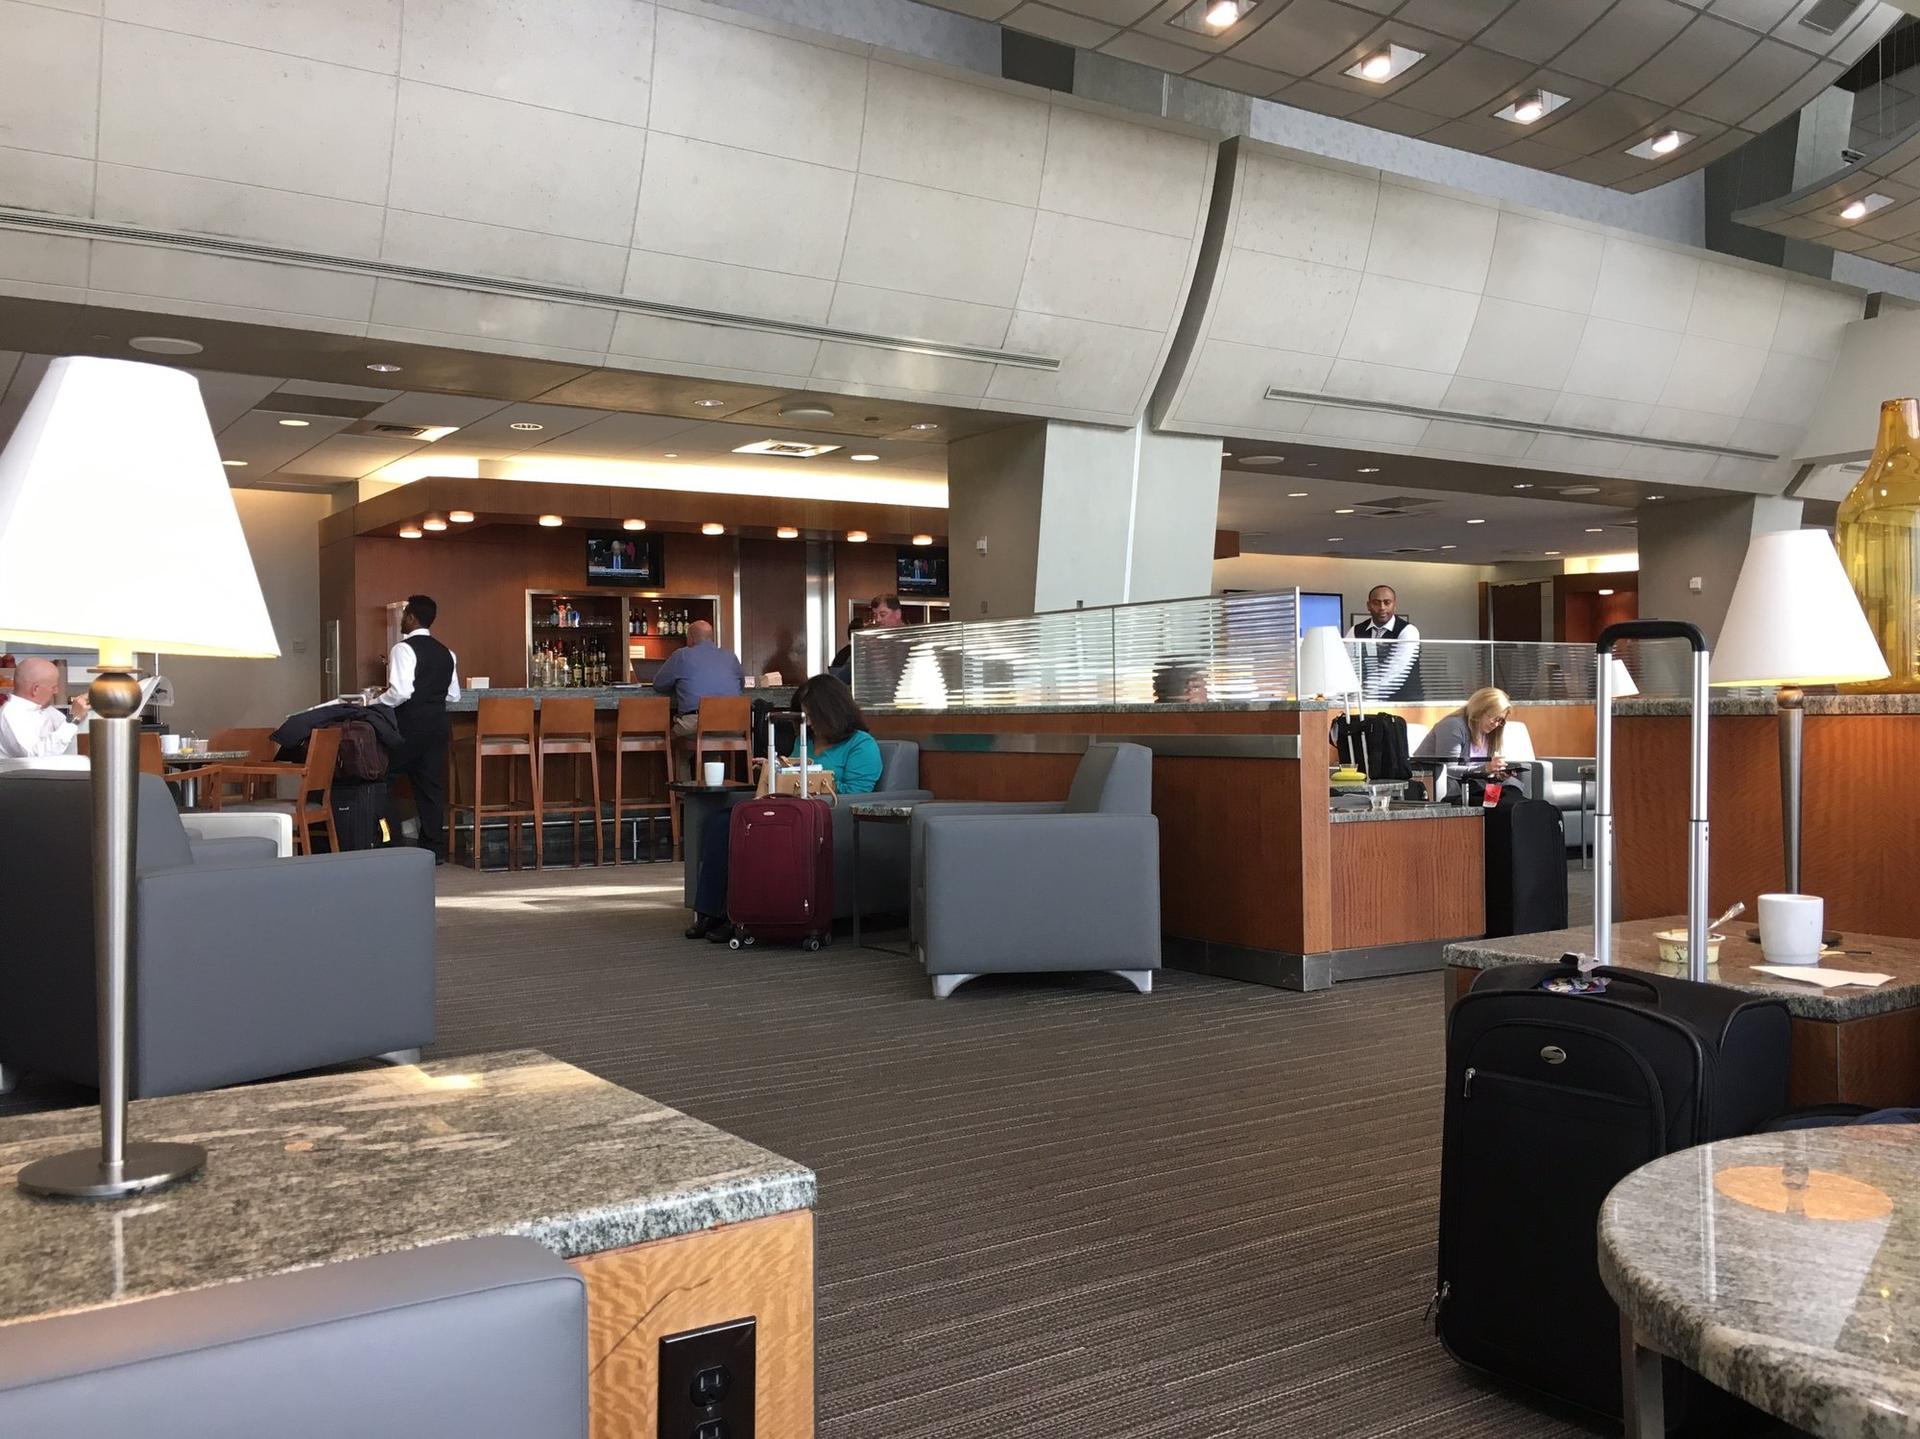 American Airlines Admirals Club image 24 of 48